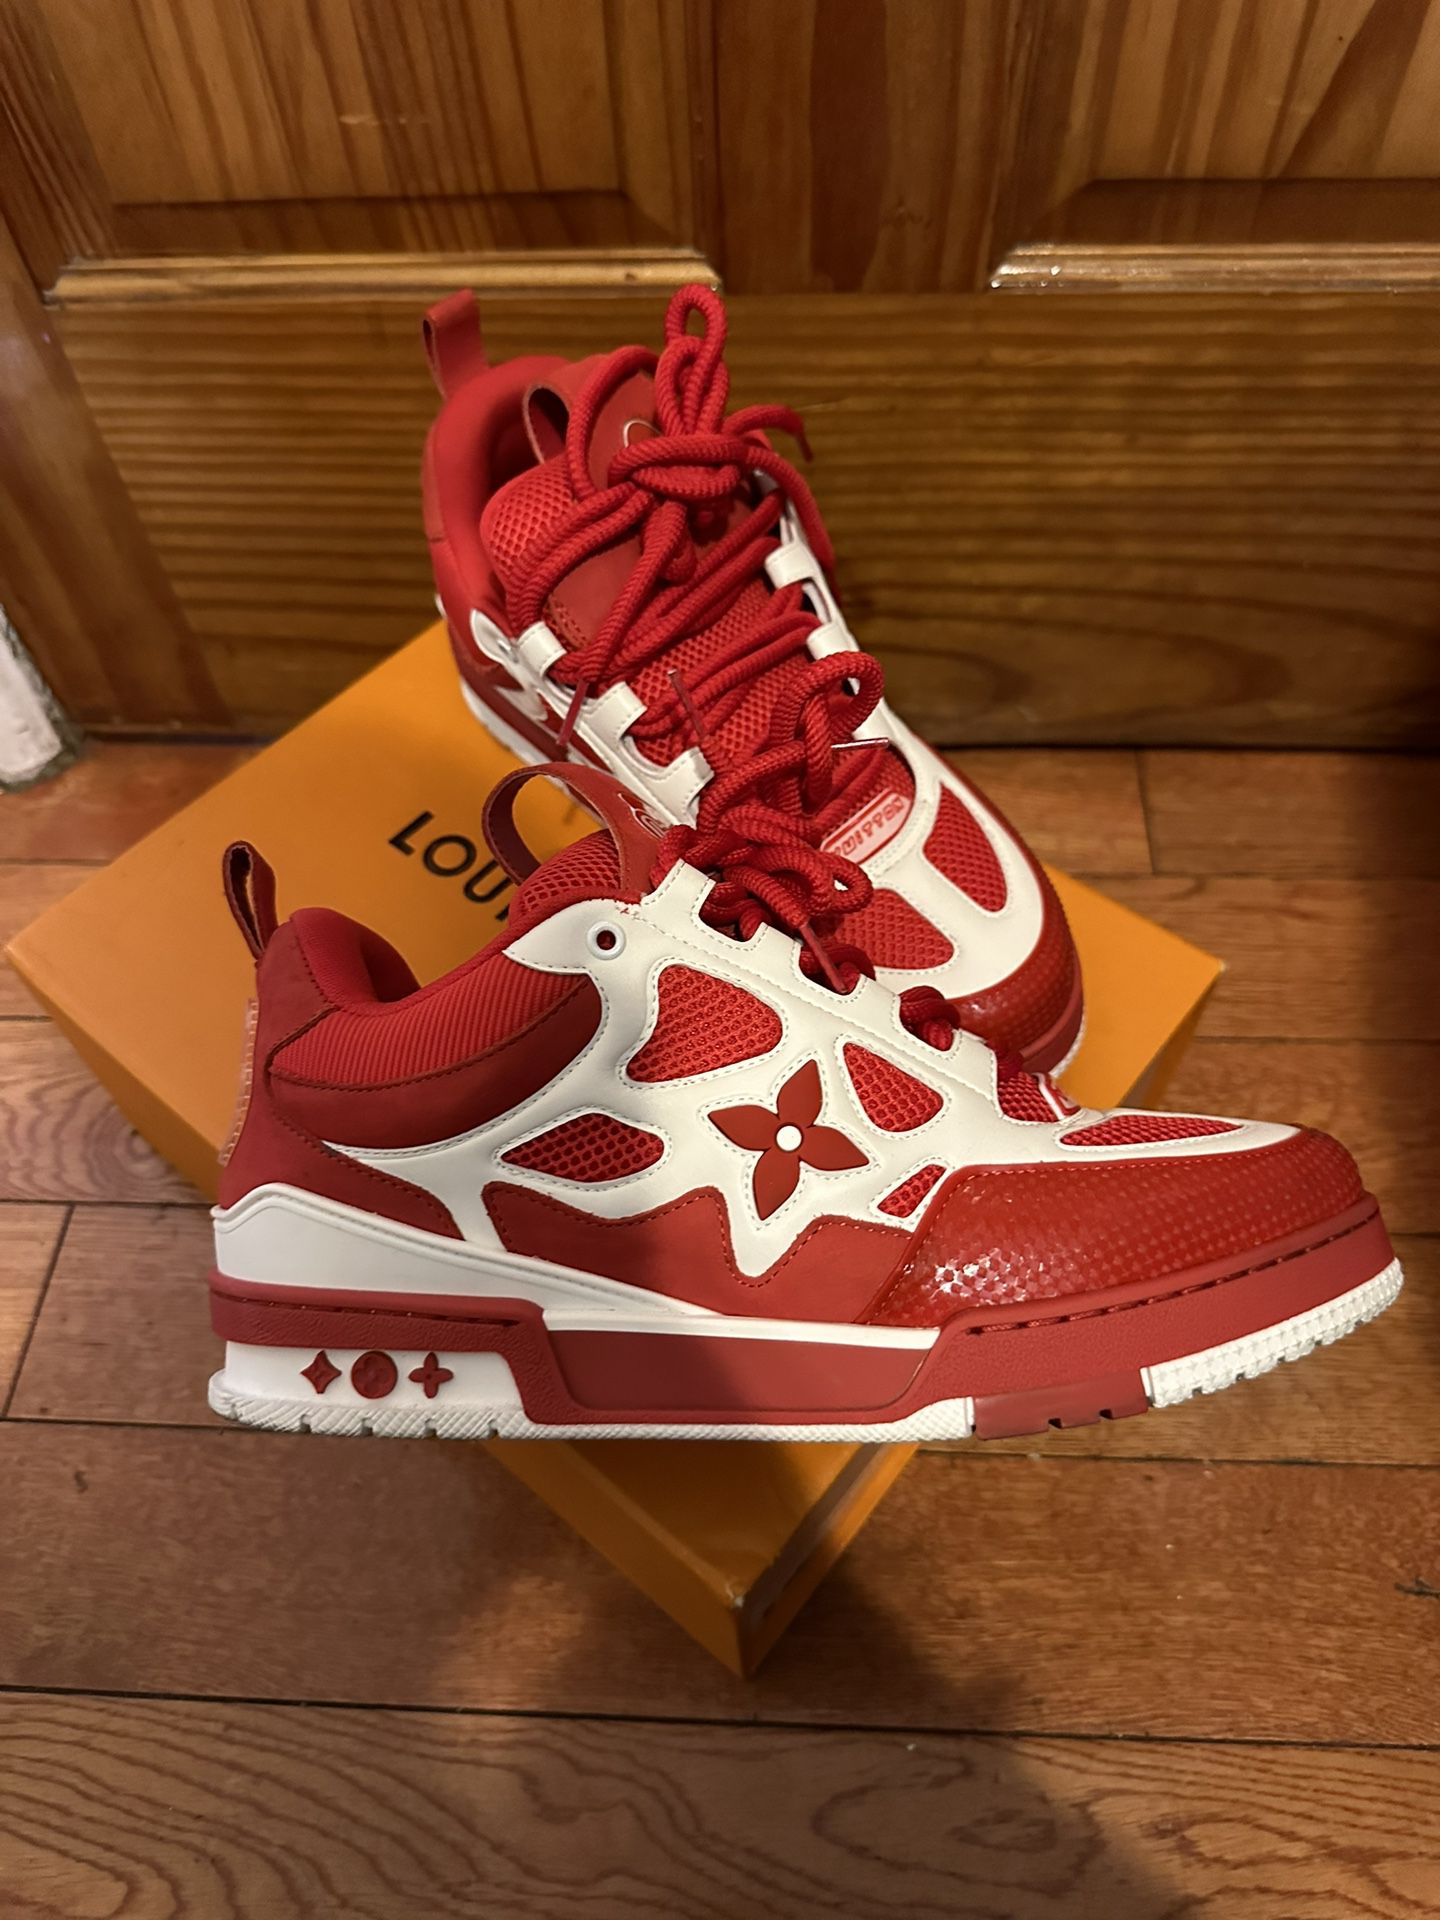 Louis vuitton sneakers Size 11 for Sale in Peck Slip, NY - OfferUp